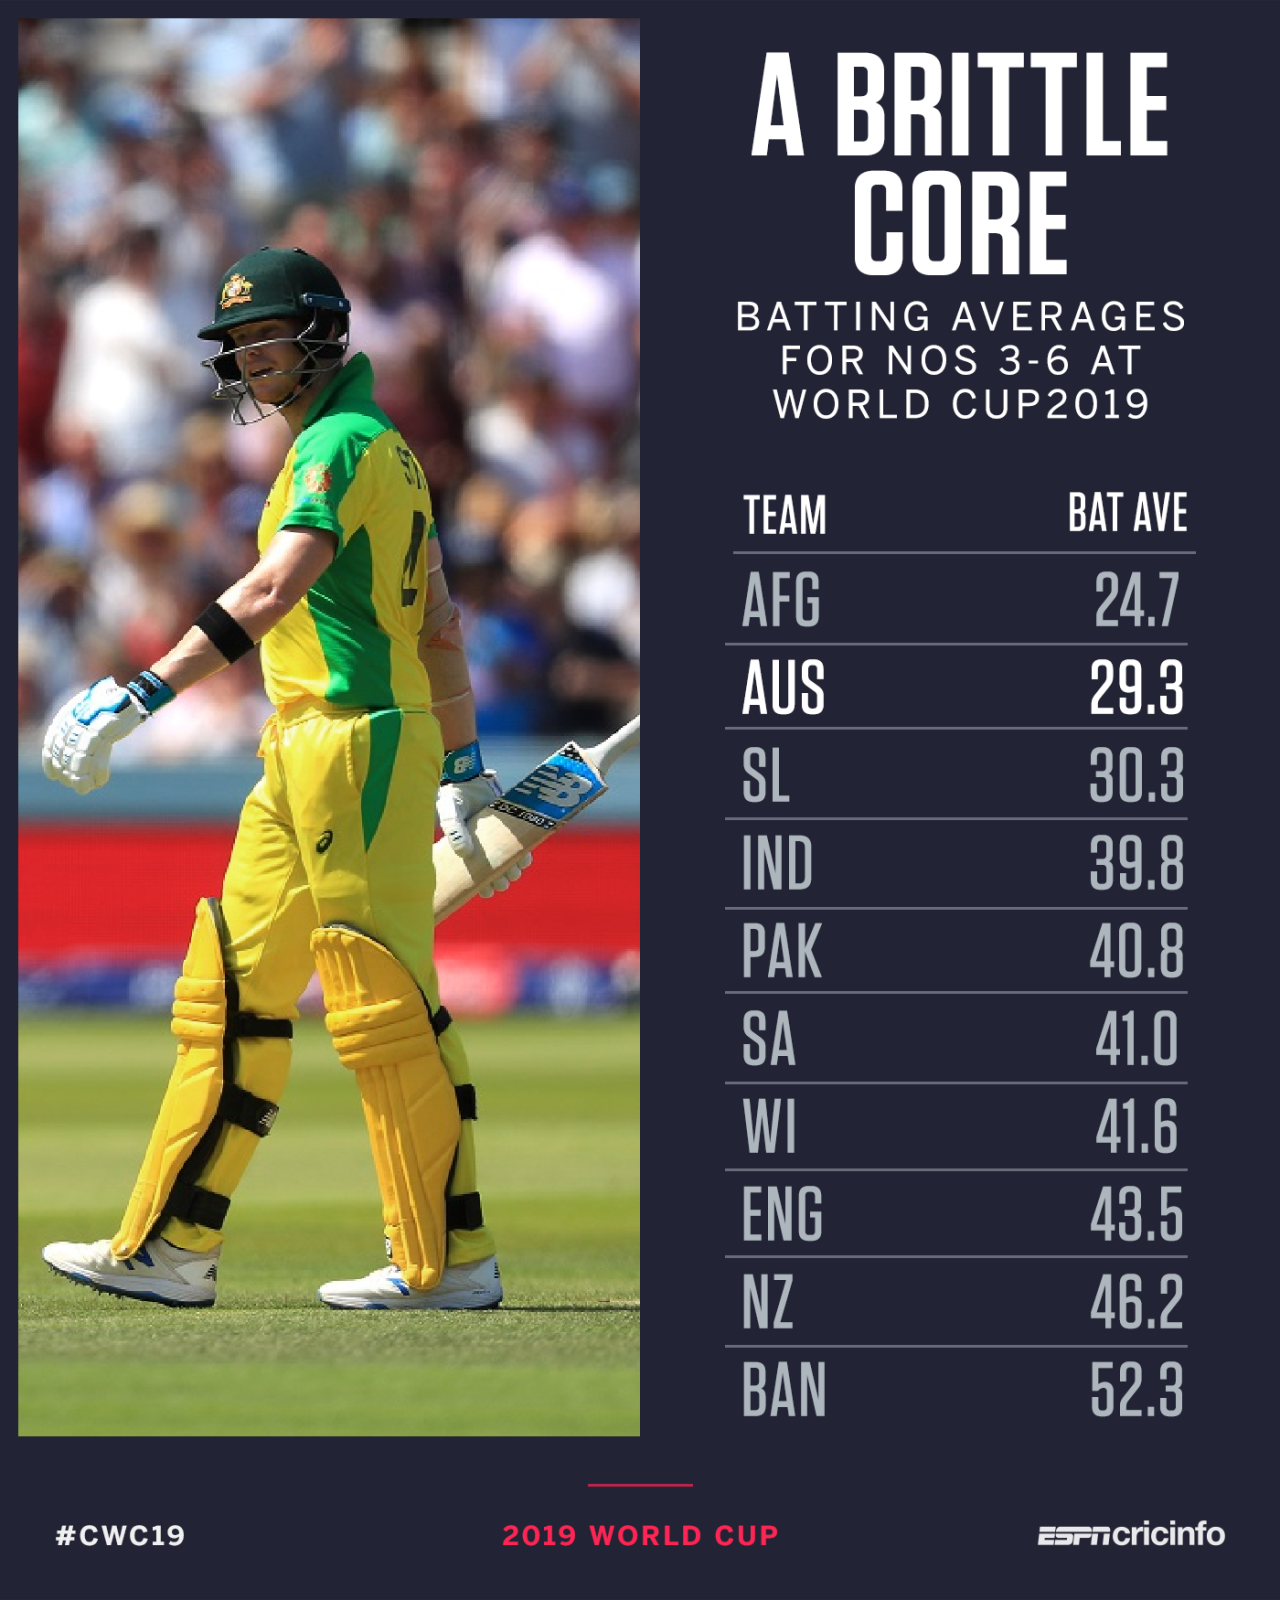 Smith and Co haven't peaked at this World Cup yet